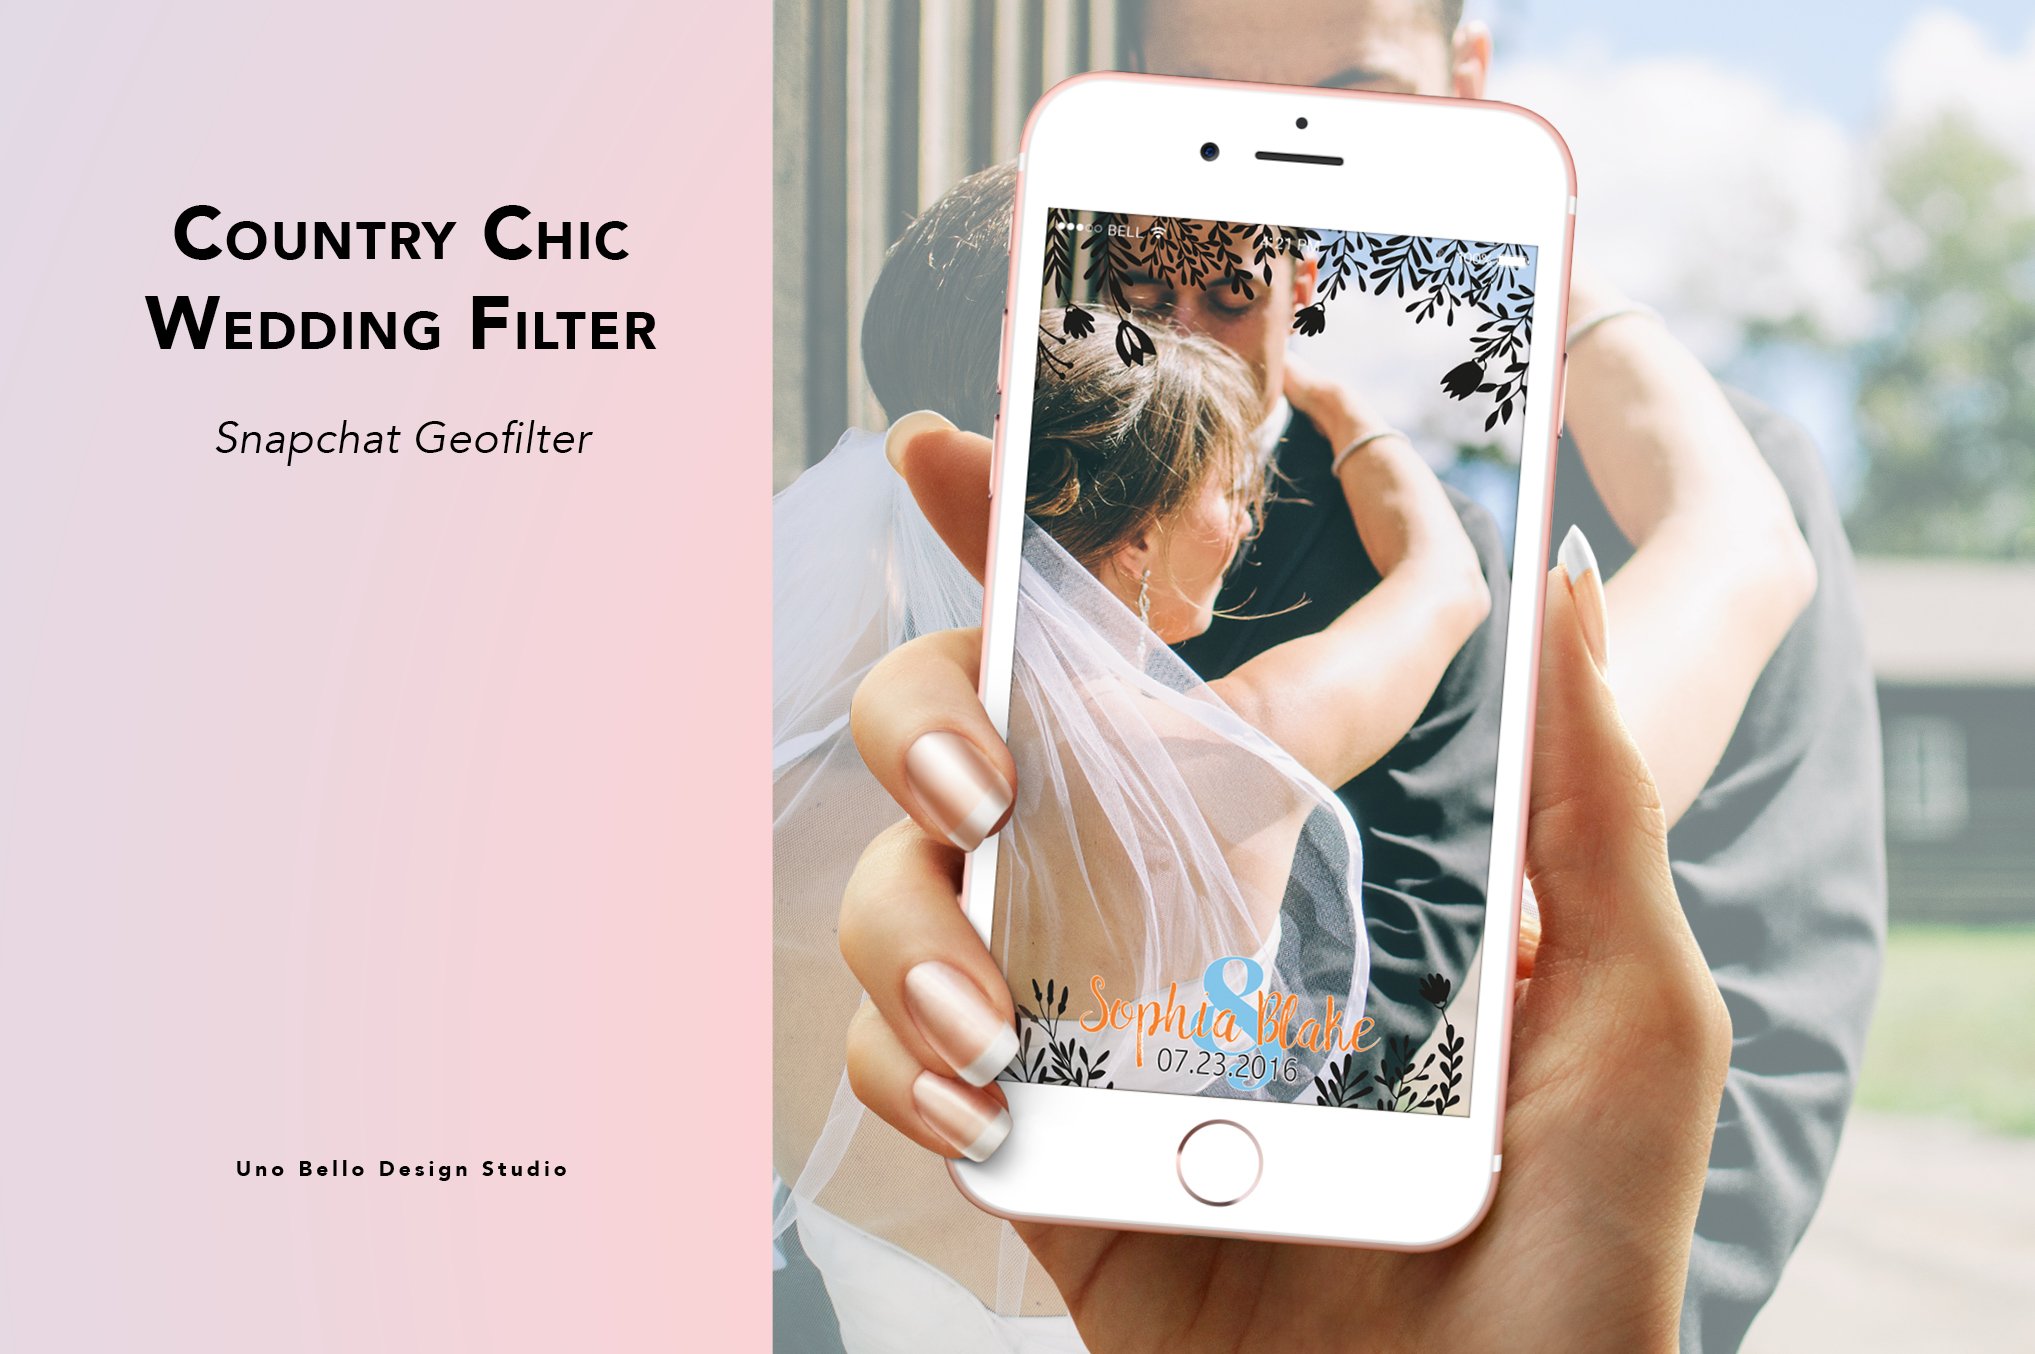 Country Chic Wedding Filter cover image.